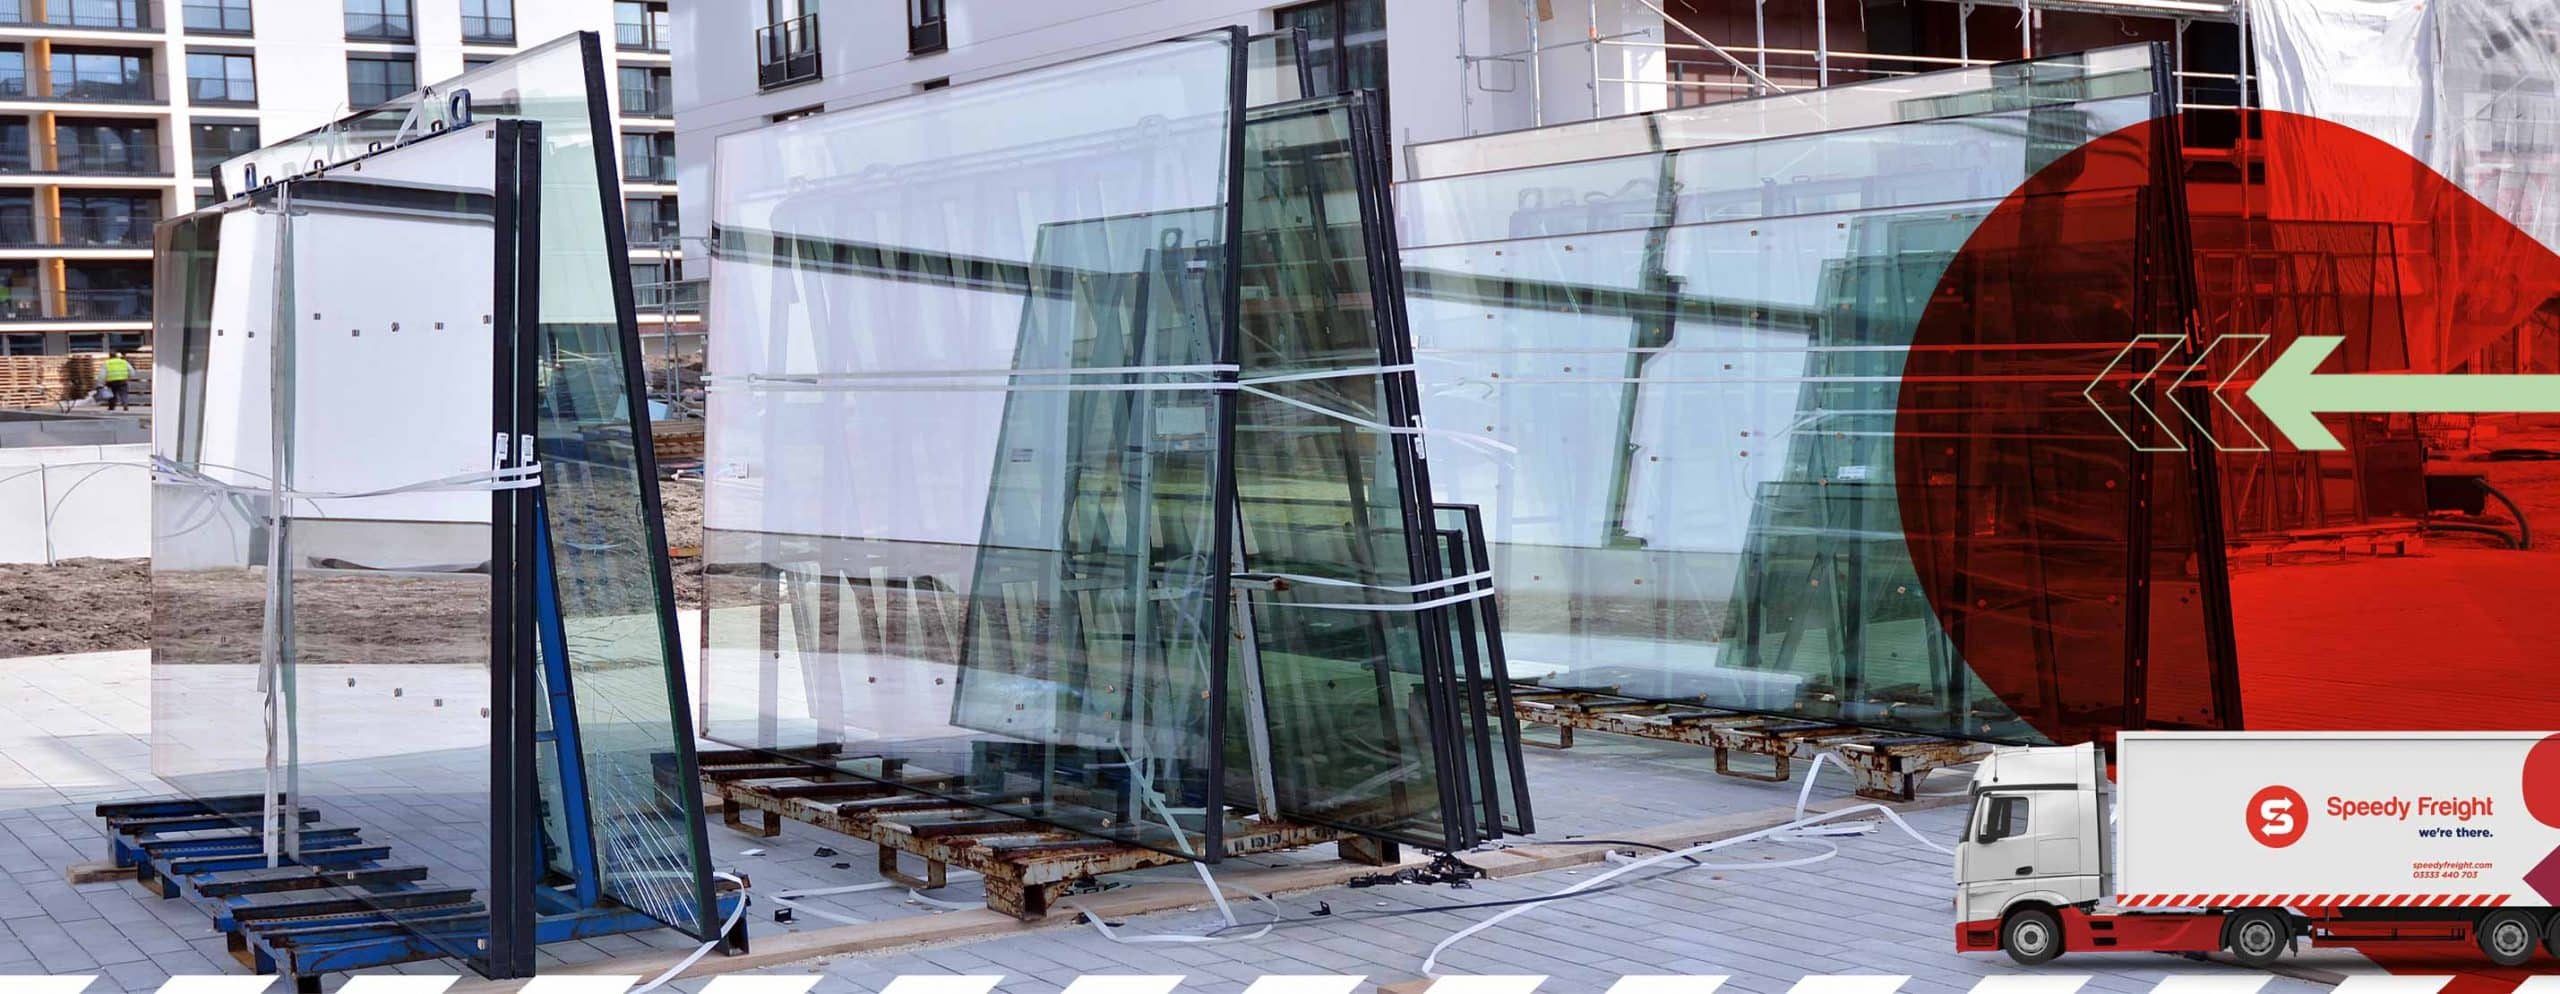 Delivery of Glass Stillages to a Hospital Construction Site: A Case Study